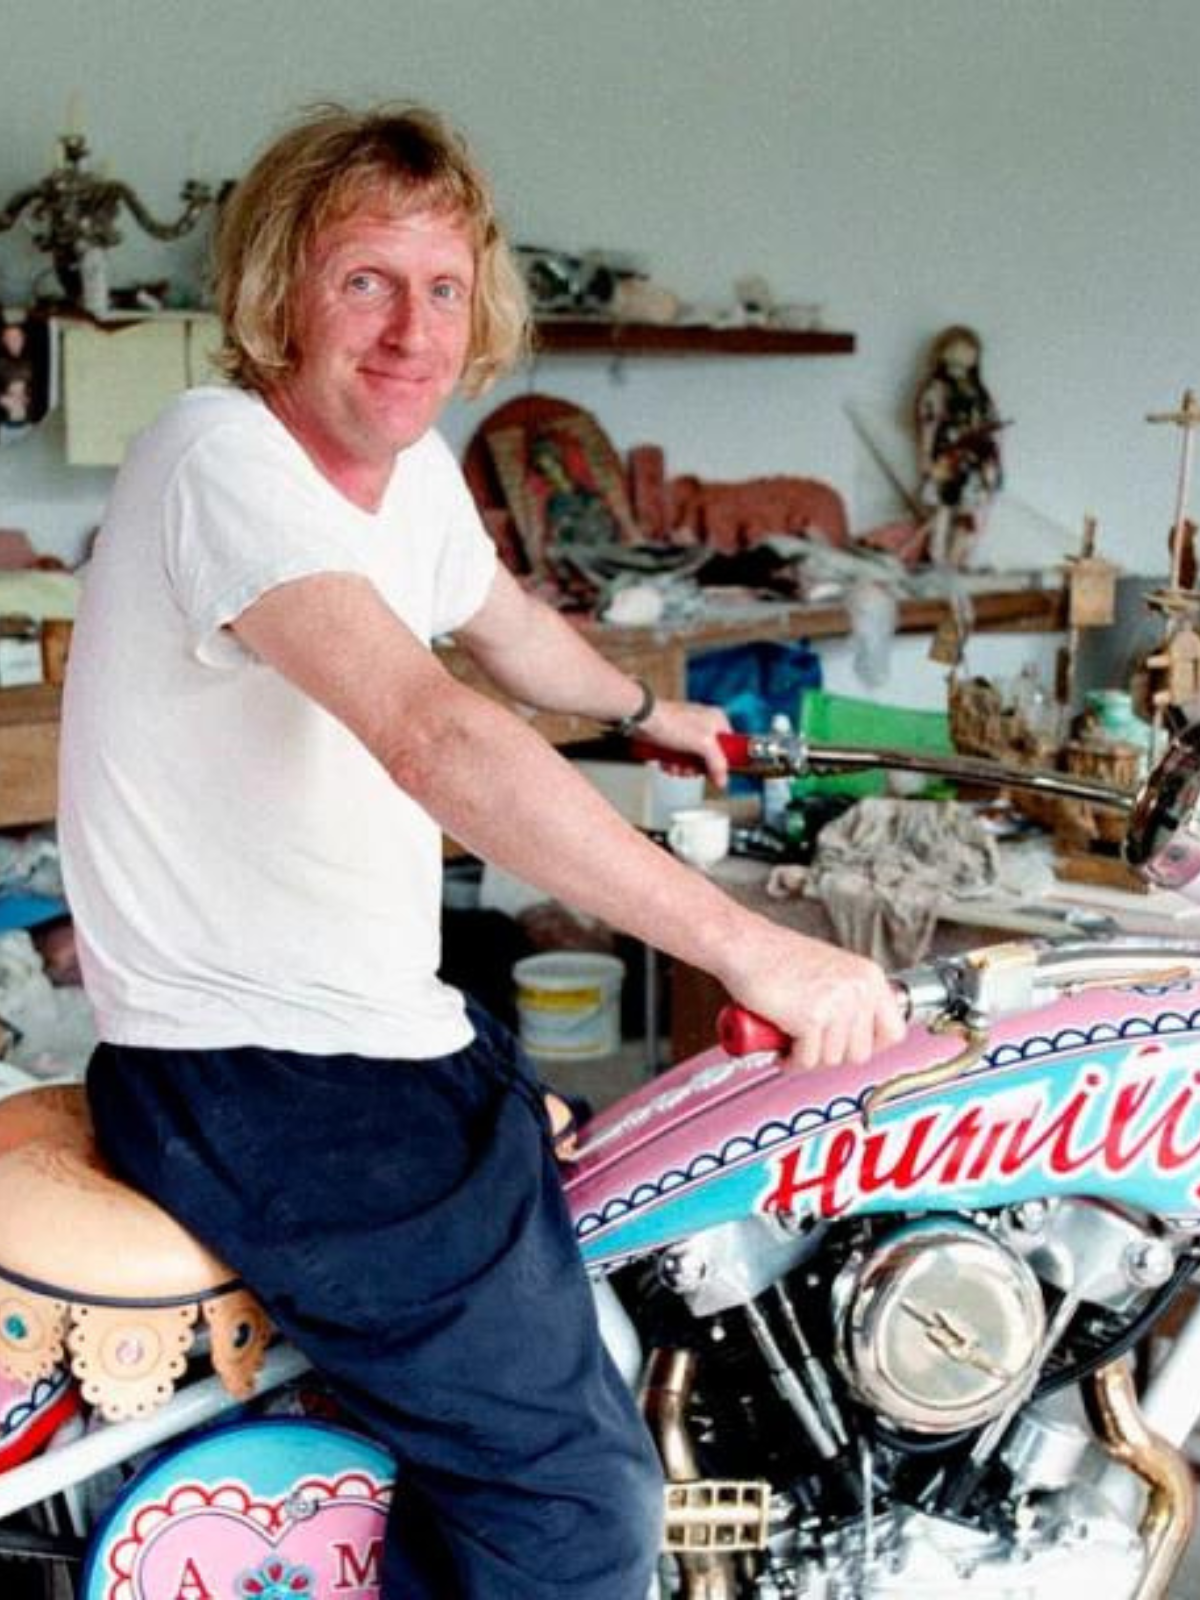 Grayson Perry sitting on motorcycle